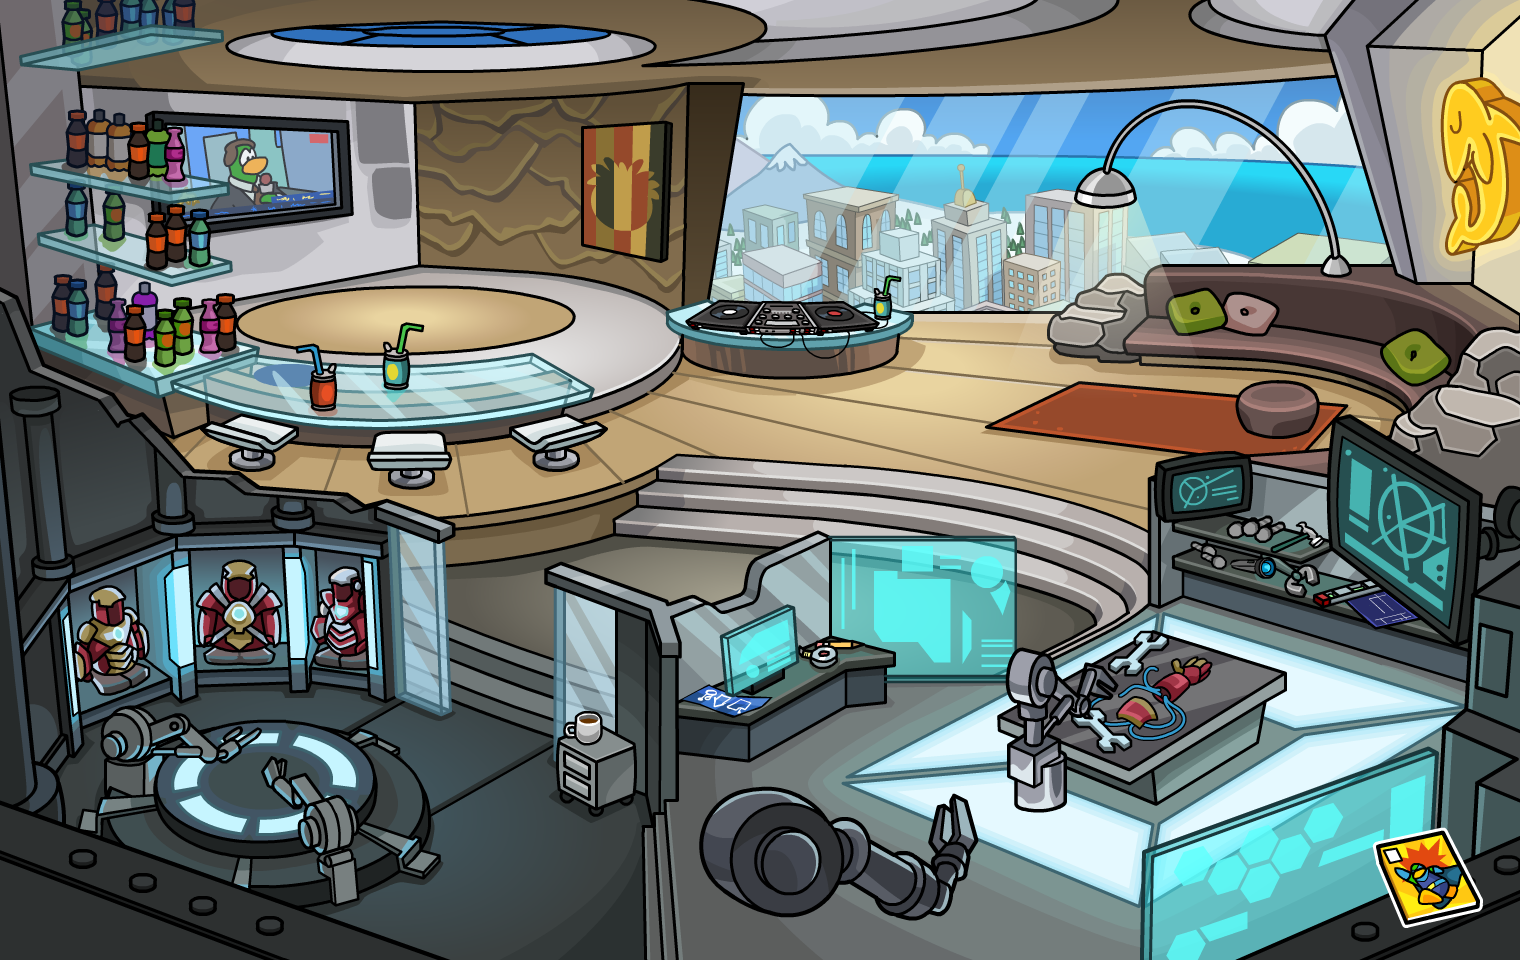 http://img2.wikia.nocookie.net/__cb20130426103739/clubpenguin/images/2/26/Room_Hero_Lab_Marvel_Super_Hero_Takeover_2013.png